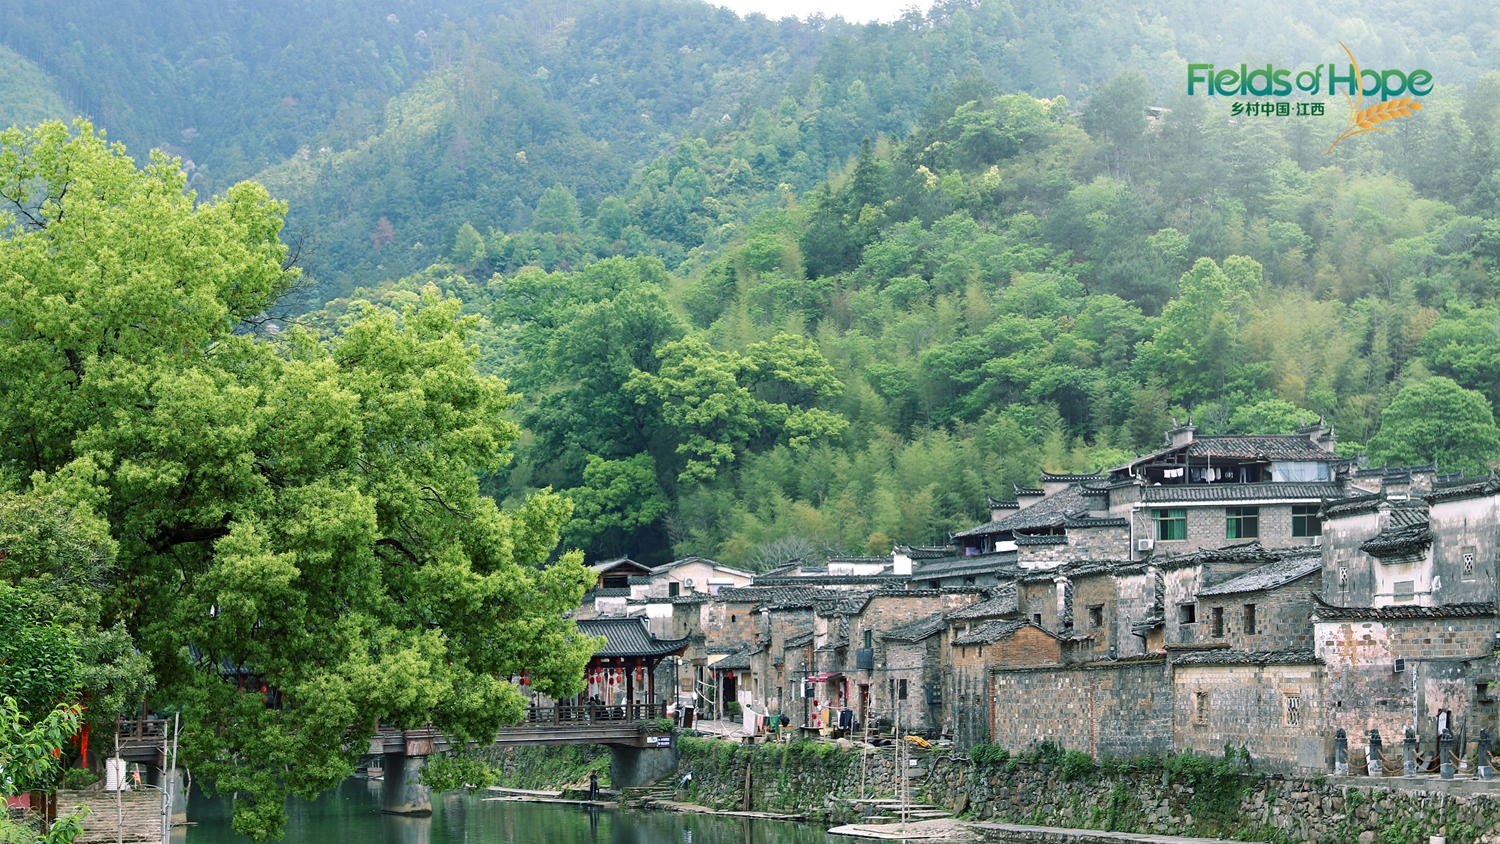 Here in Yaoli ancient town in Jingdezhen, Jiangxi, the well-preserved buildings are in perfect harmony with the mountain scenery. /CGTN